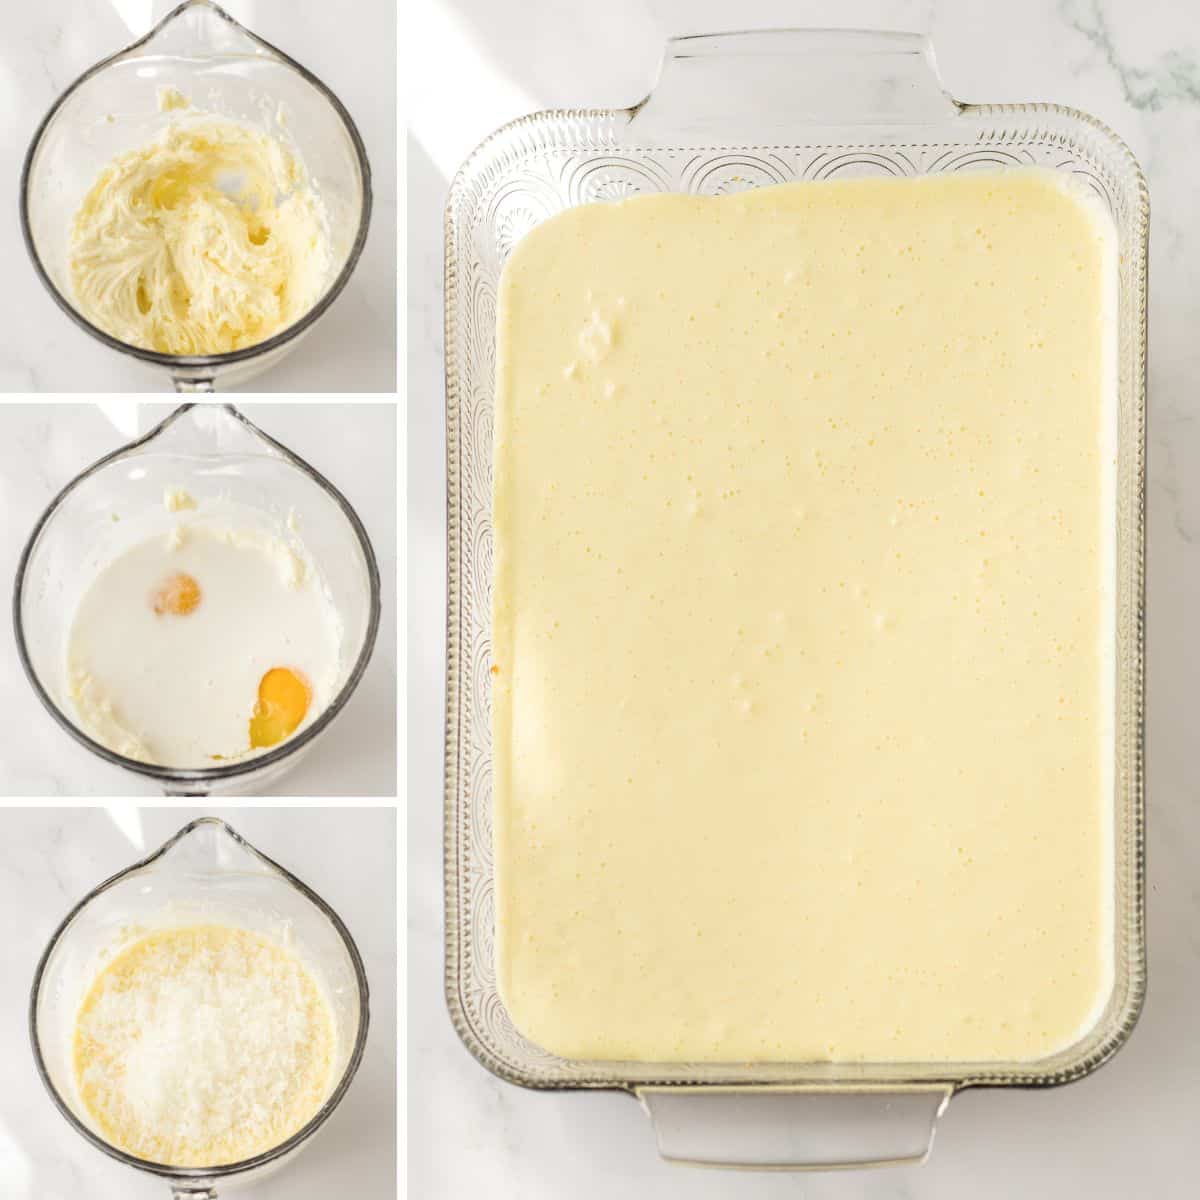 Steps to make cheesecake layer: ingredients combined in mixing bowl then poured into casserole dish.